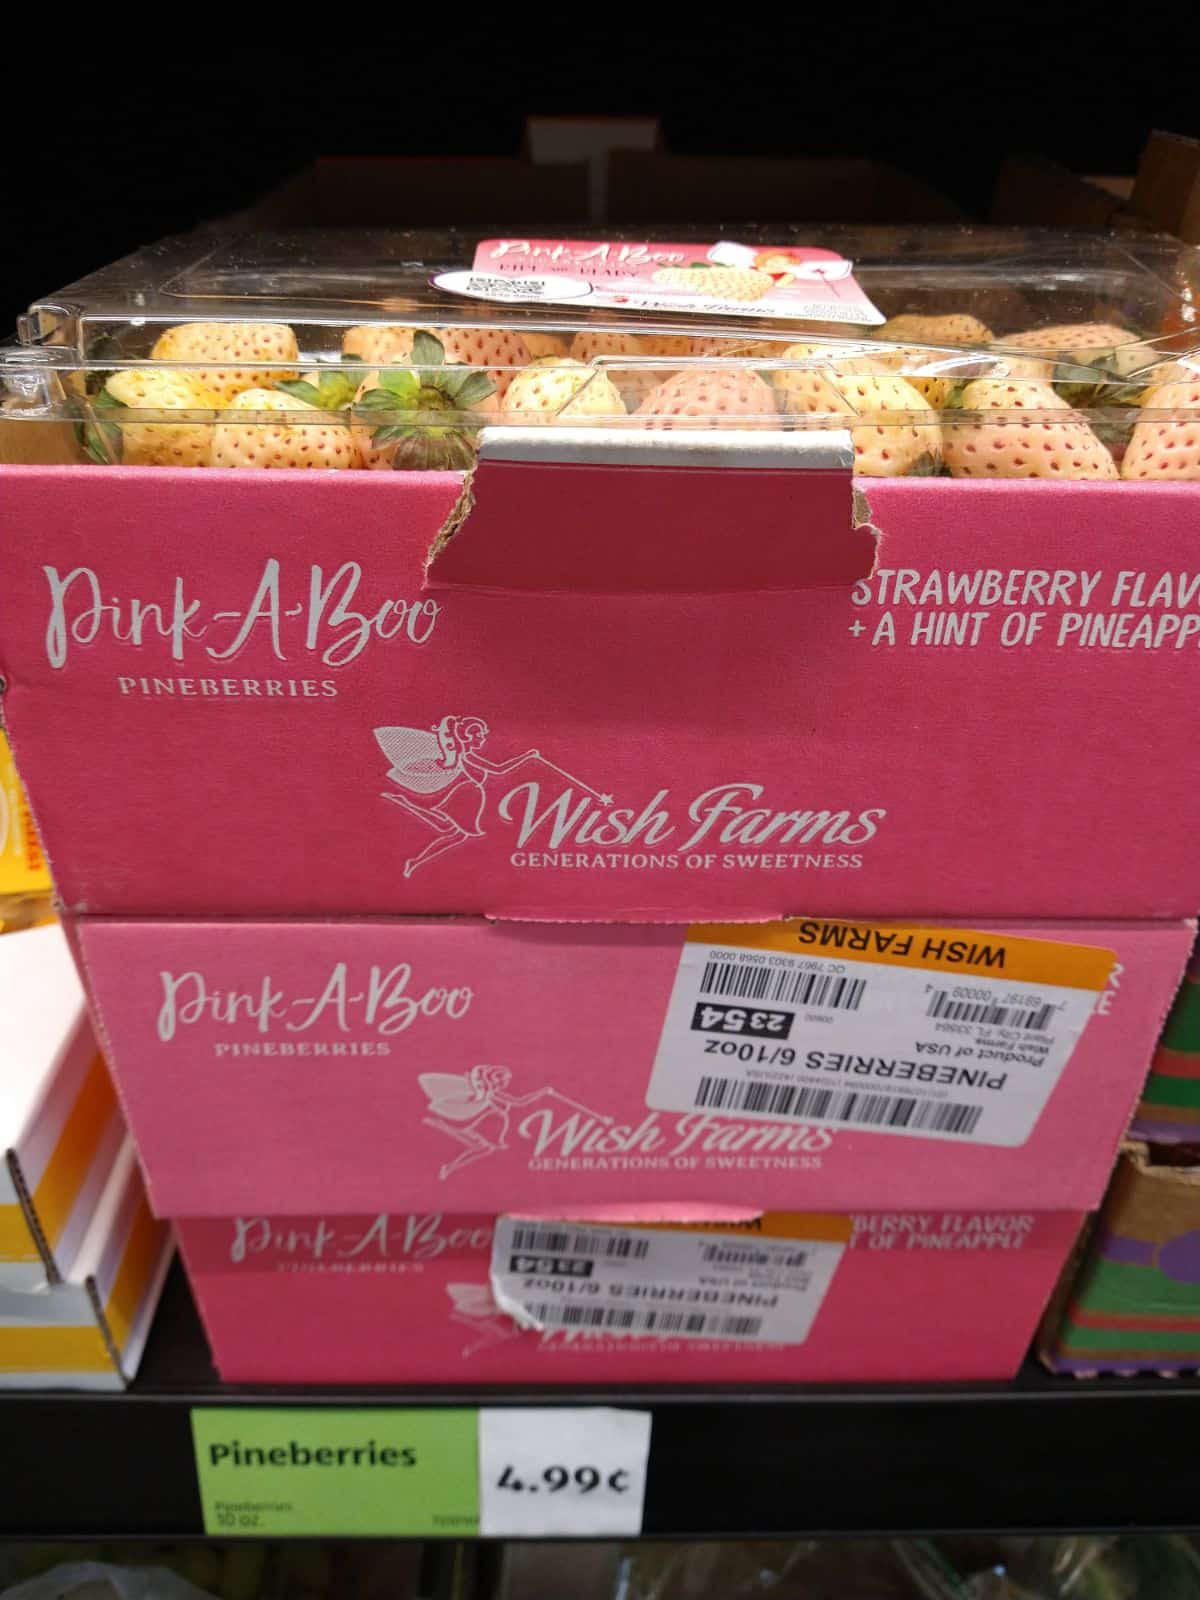 A display of boxes of pineberries from an ALDI. The price tag says they are $4.99 each.